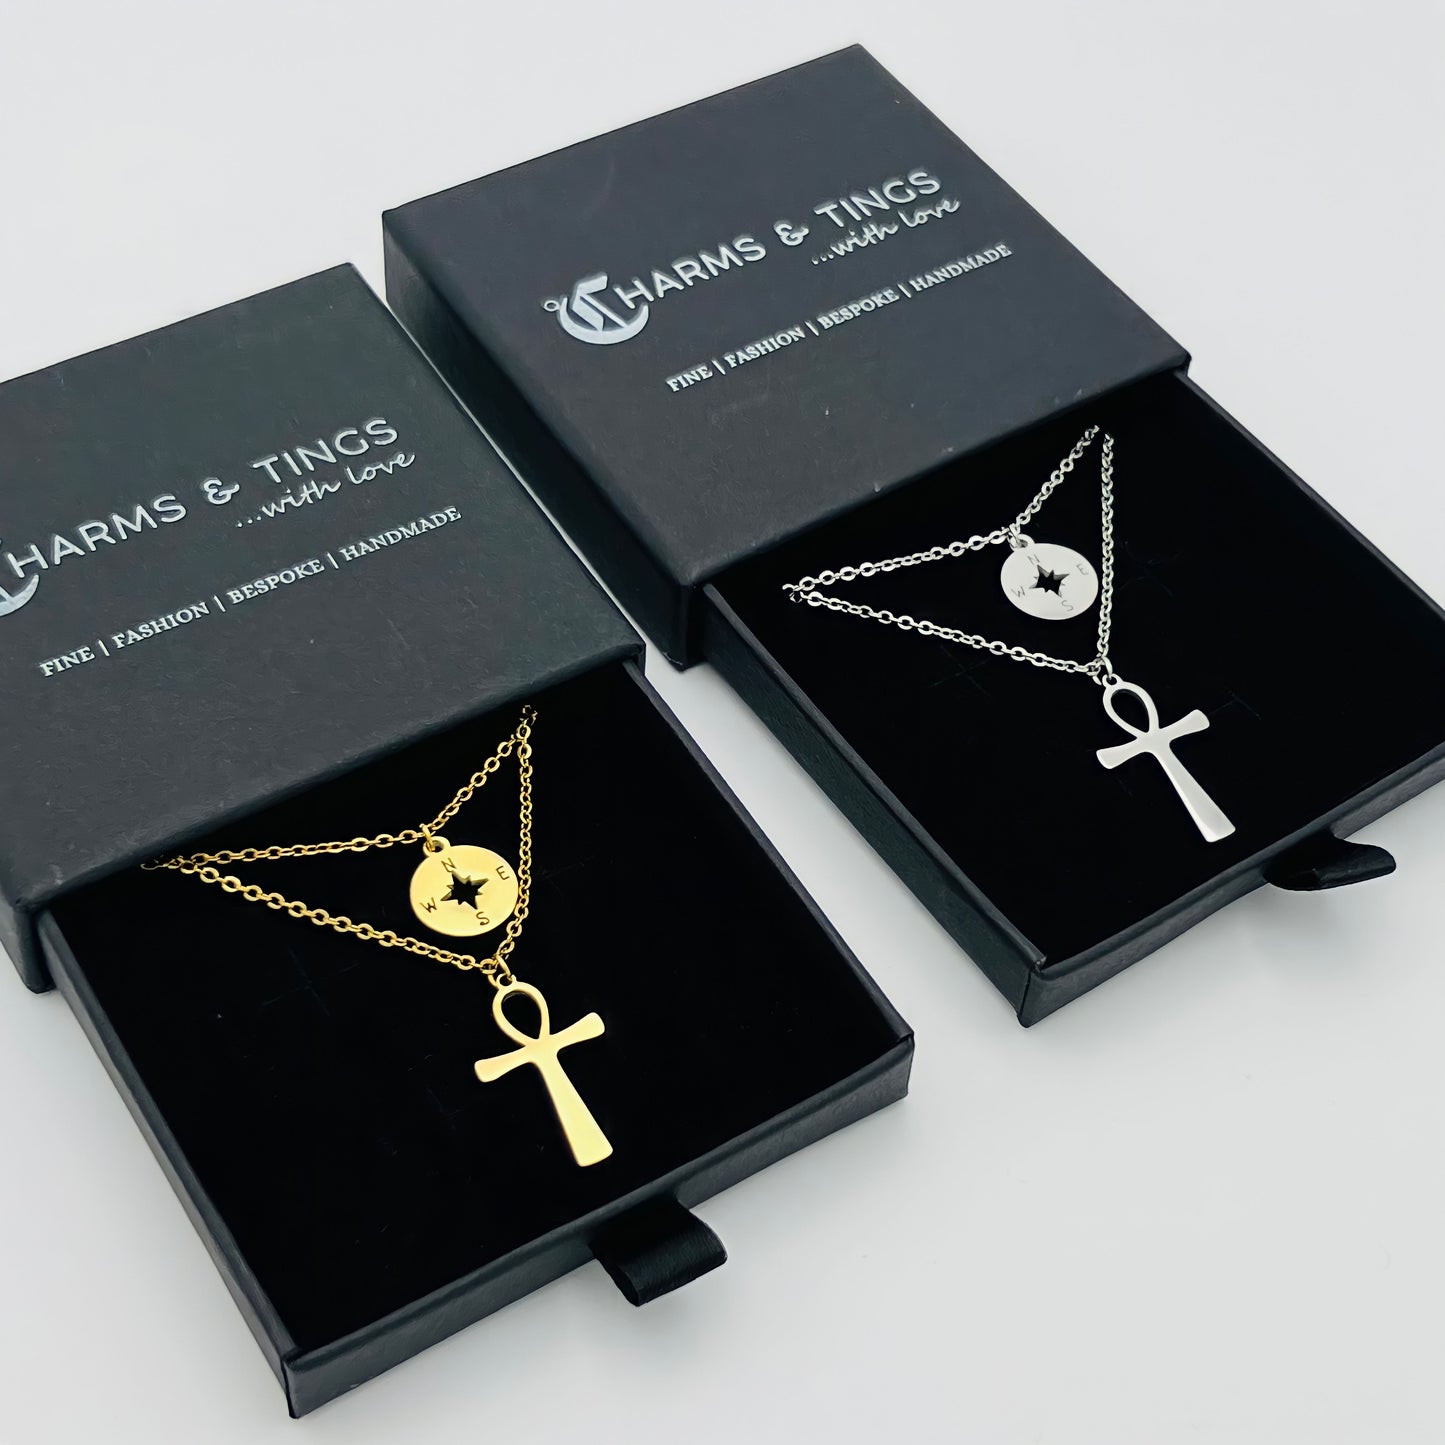 Compass & Ankh Layered Necklaces